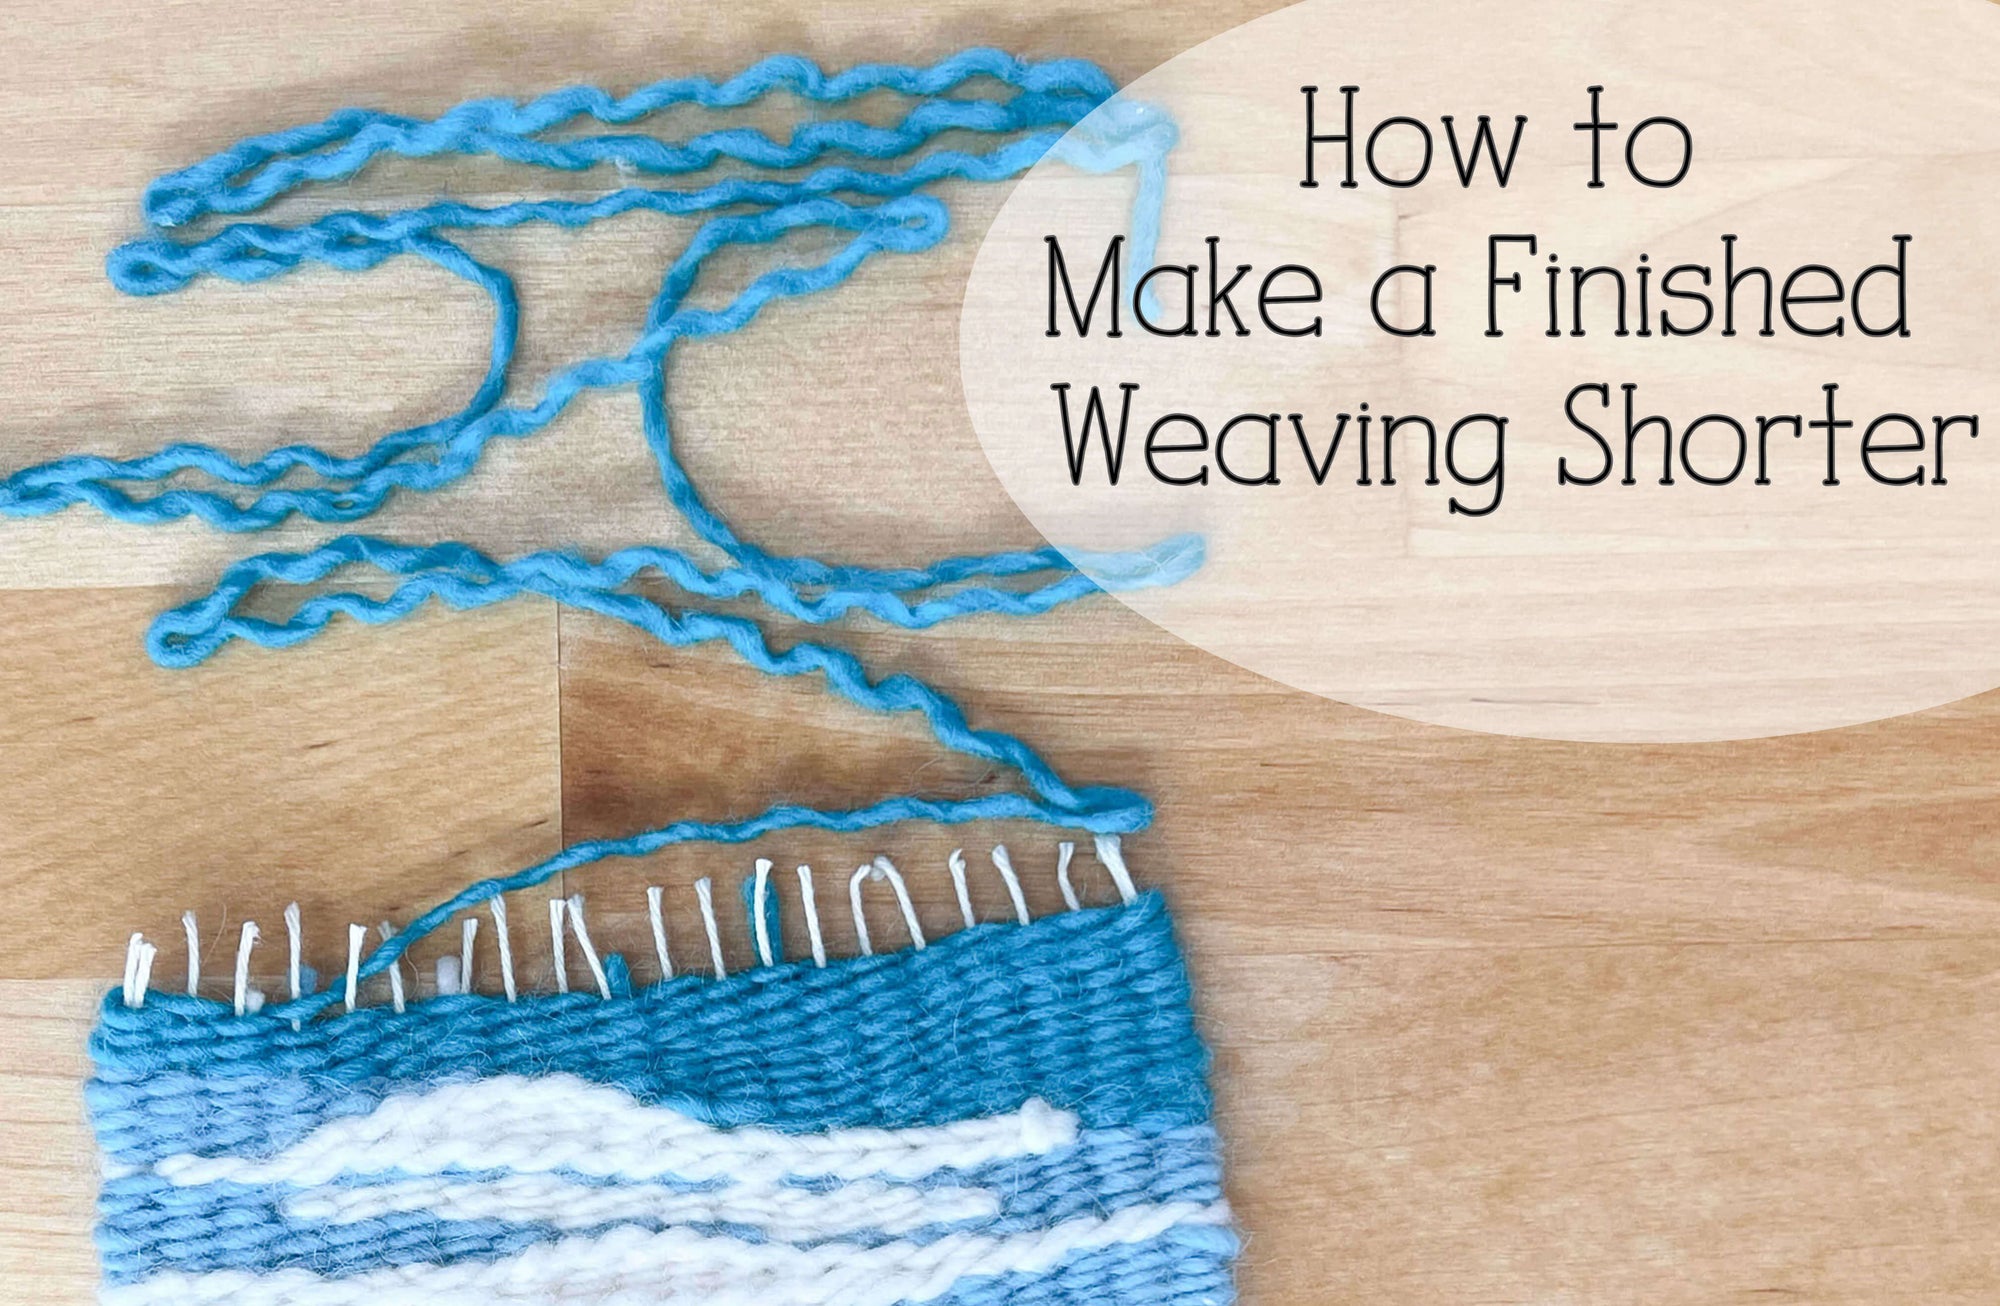 How to Make a Finished Weaving Shorter